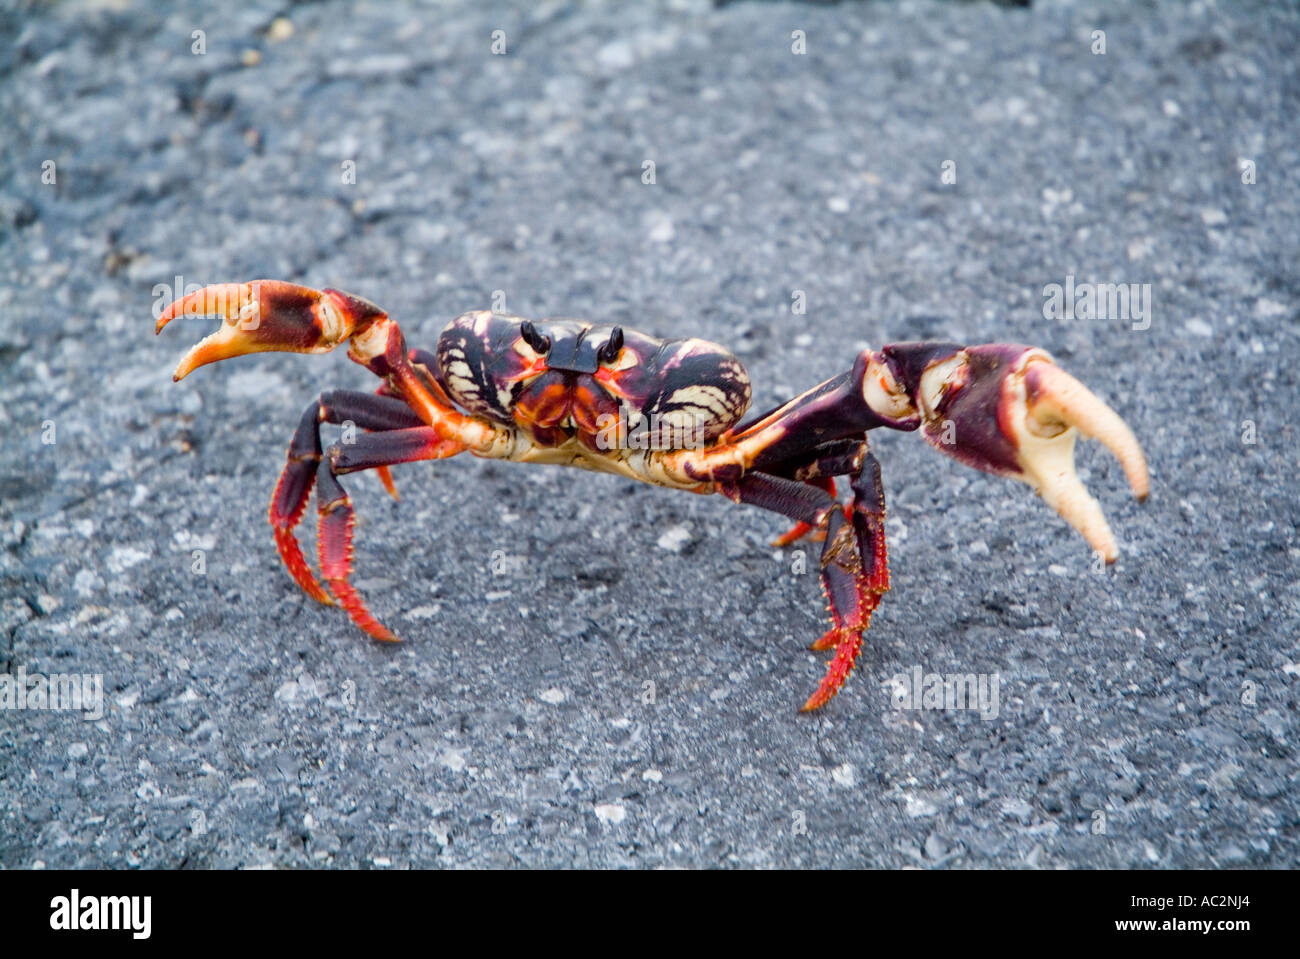 A red land crab - Gecarcinus lateralis - on the road to Maria la Gorda, Cuba. Stock Photo